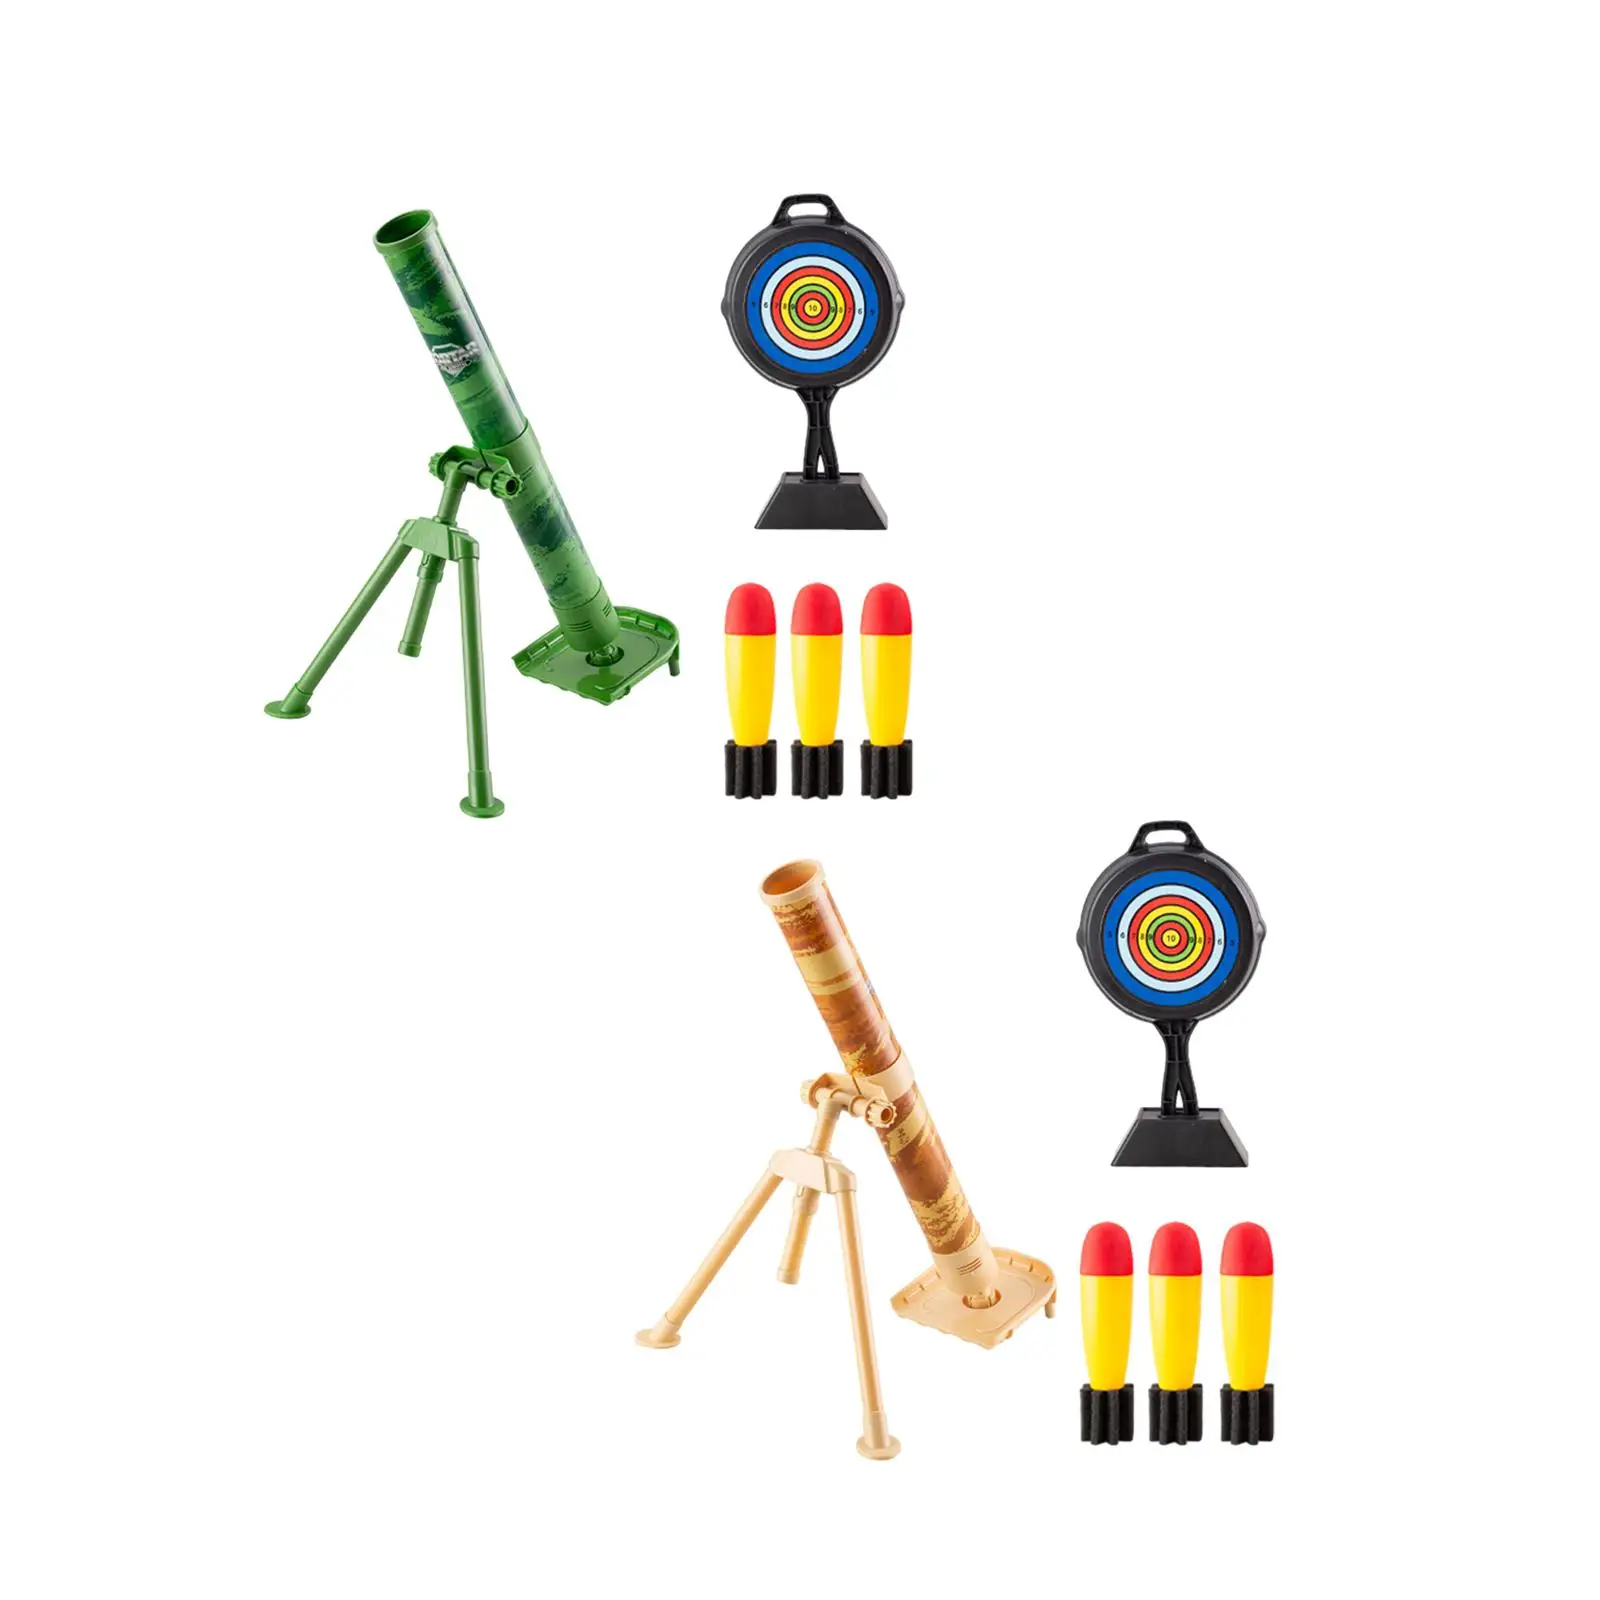 Mortar Launcher Toys Rocket Launcher Set for Boys and Girls Birthday Present